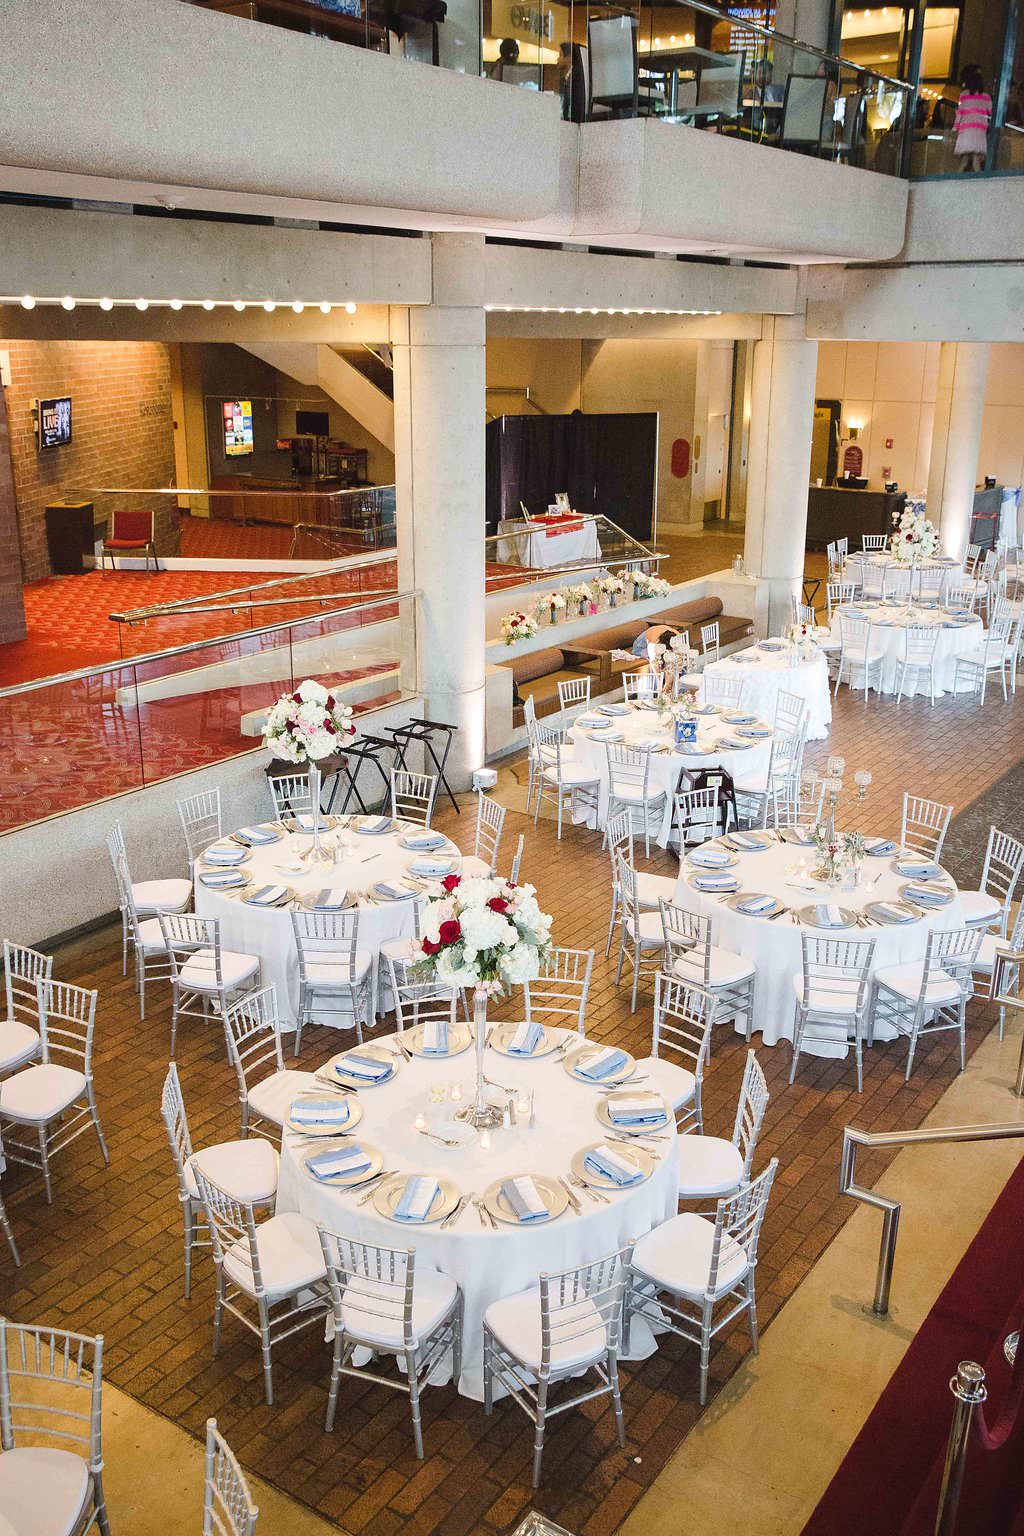 Wedding Reception Decor, Round Tables with White Tablecloths, Silver Chiavari Chairs, White and Red Floral Centerpieces, Pale Blue Linens | Tampa Bay Photographer Marc Edwards Photography | Tampa Venue Straz Center